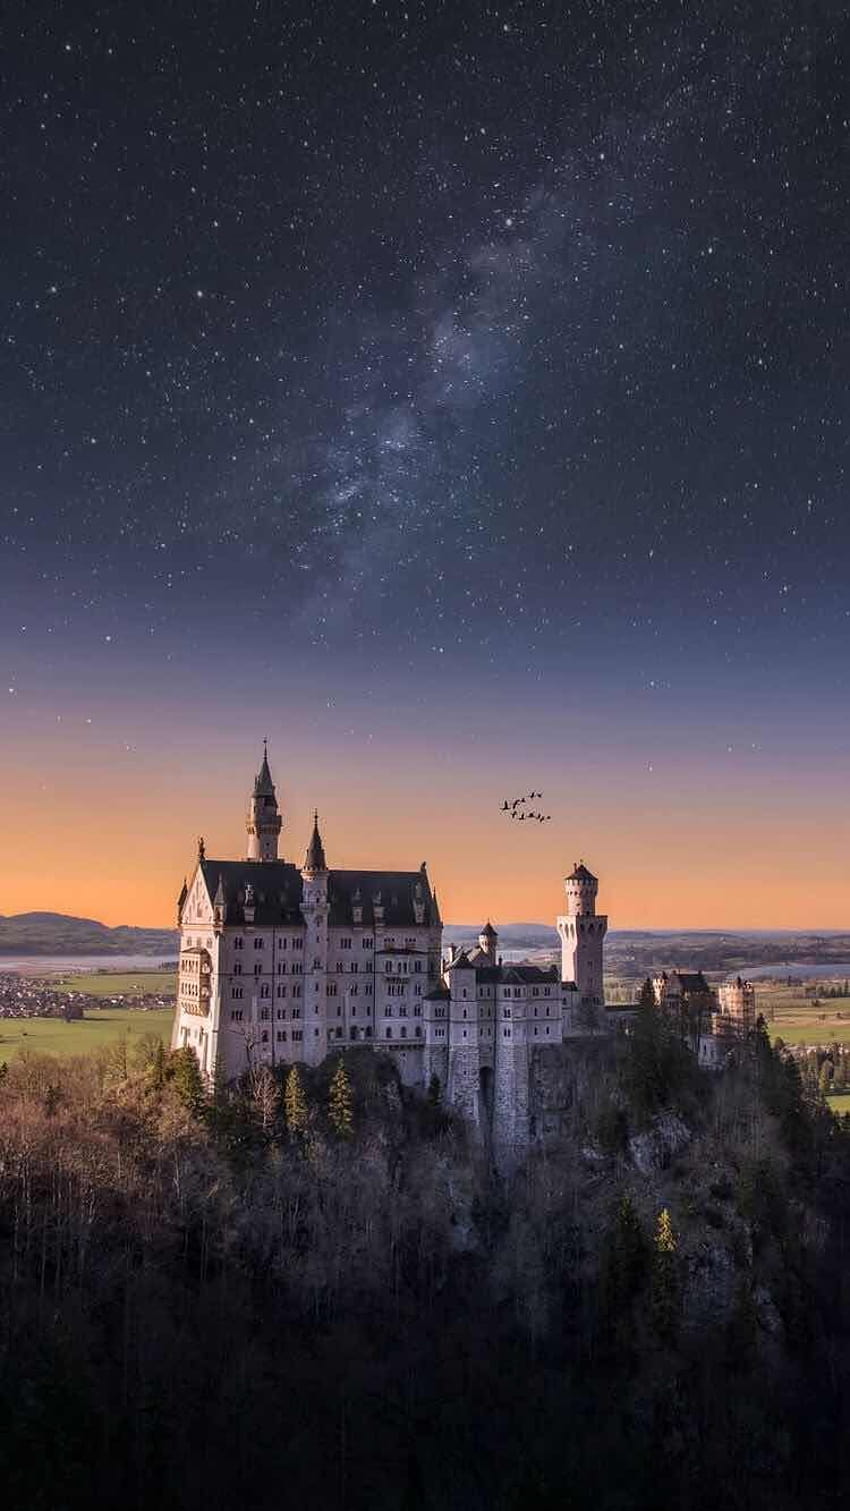 iPhone and Android : Starry Castle for iPhone and Android, bonn HD phone wallpaper